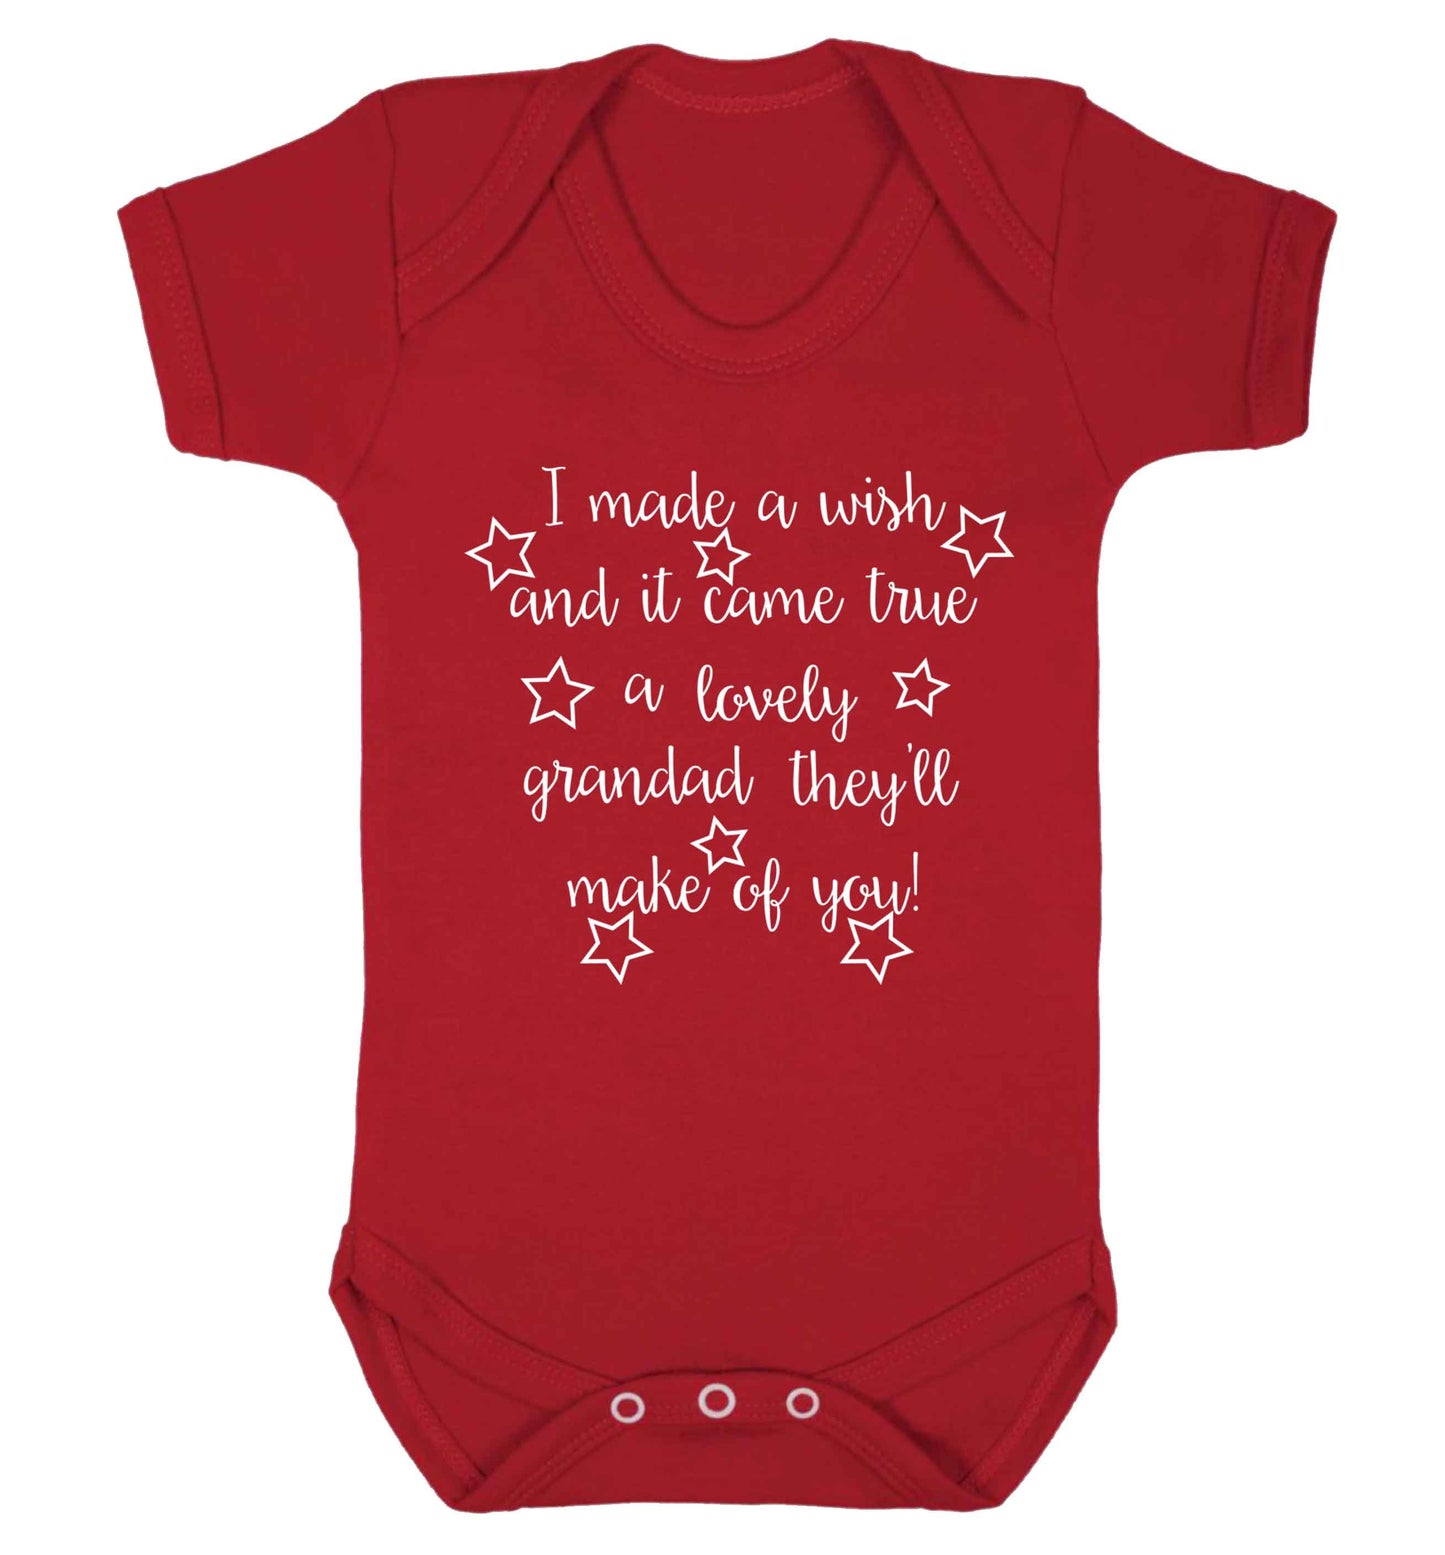 I made a wish and it came true a lovely grandad they'll make of you! Baby Vest red 18-24 months